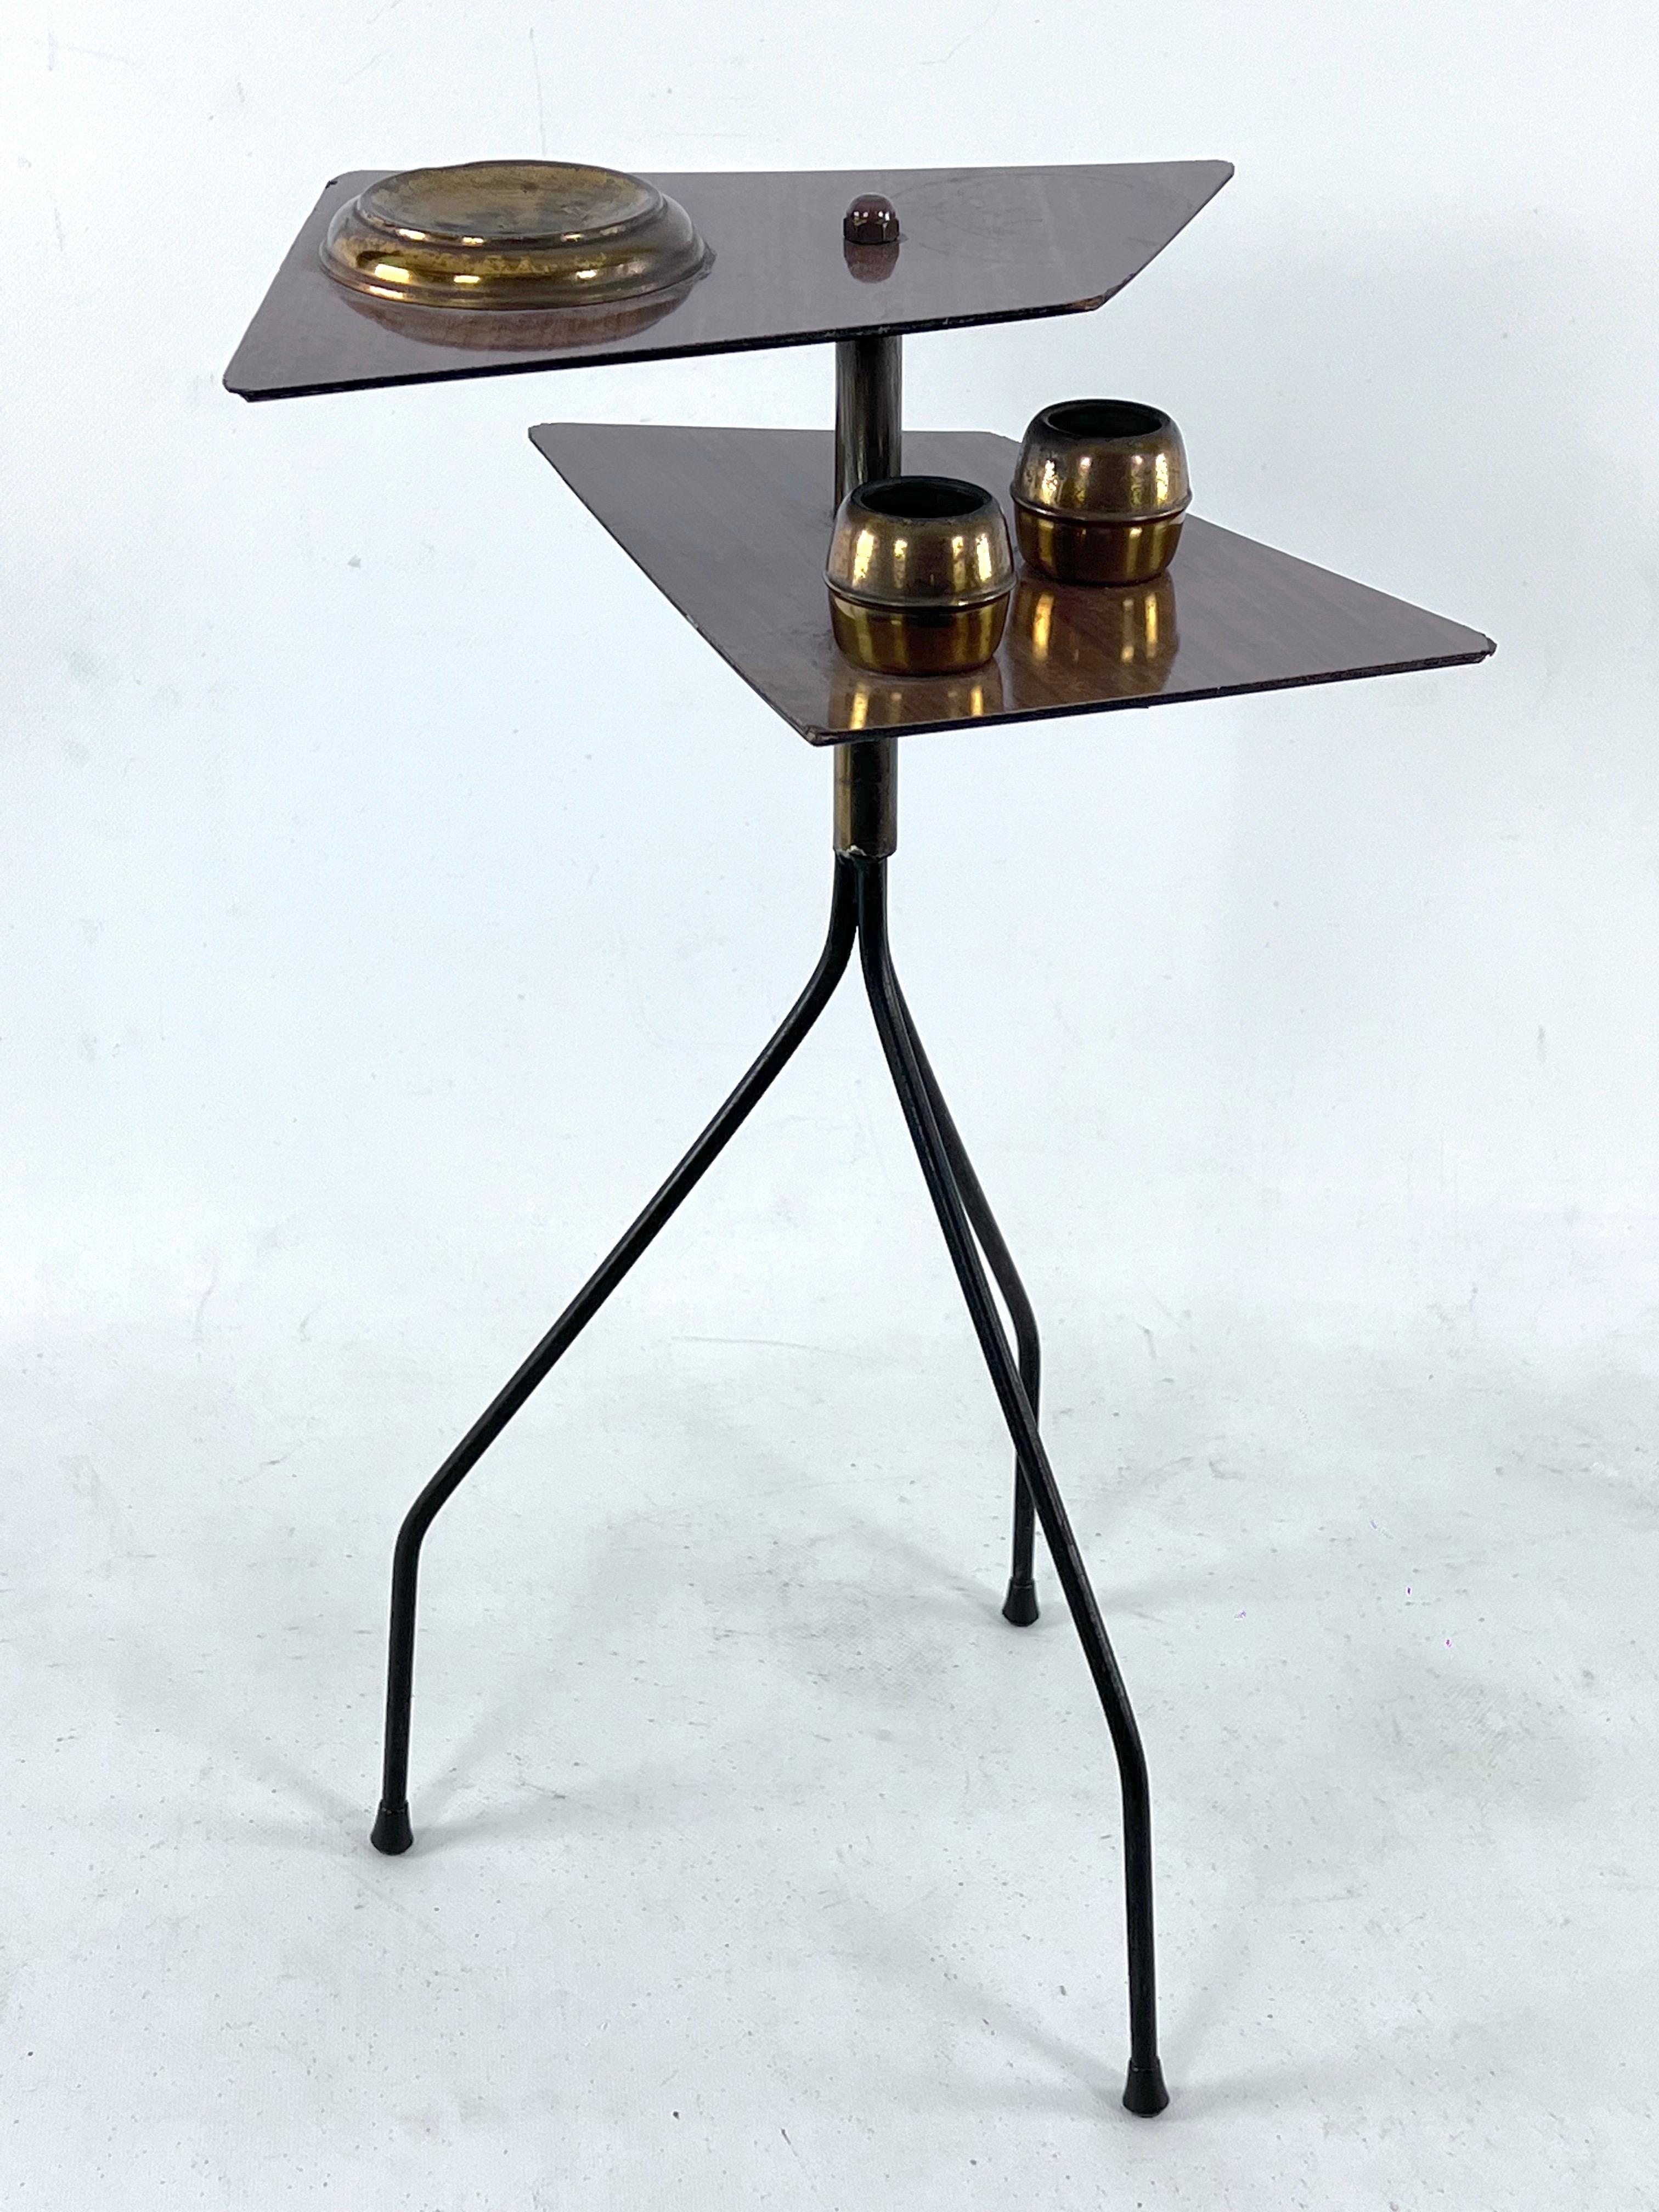 Midcentury Ashtray Tripod in Brass and Formica, Italy, 1950s For Sale 2